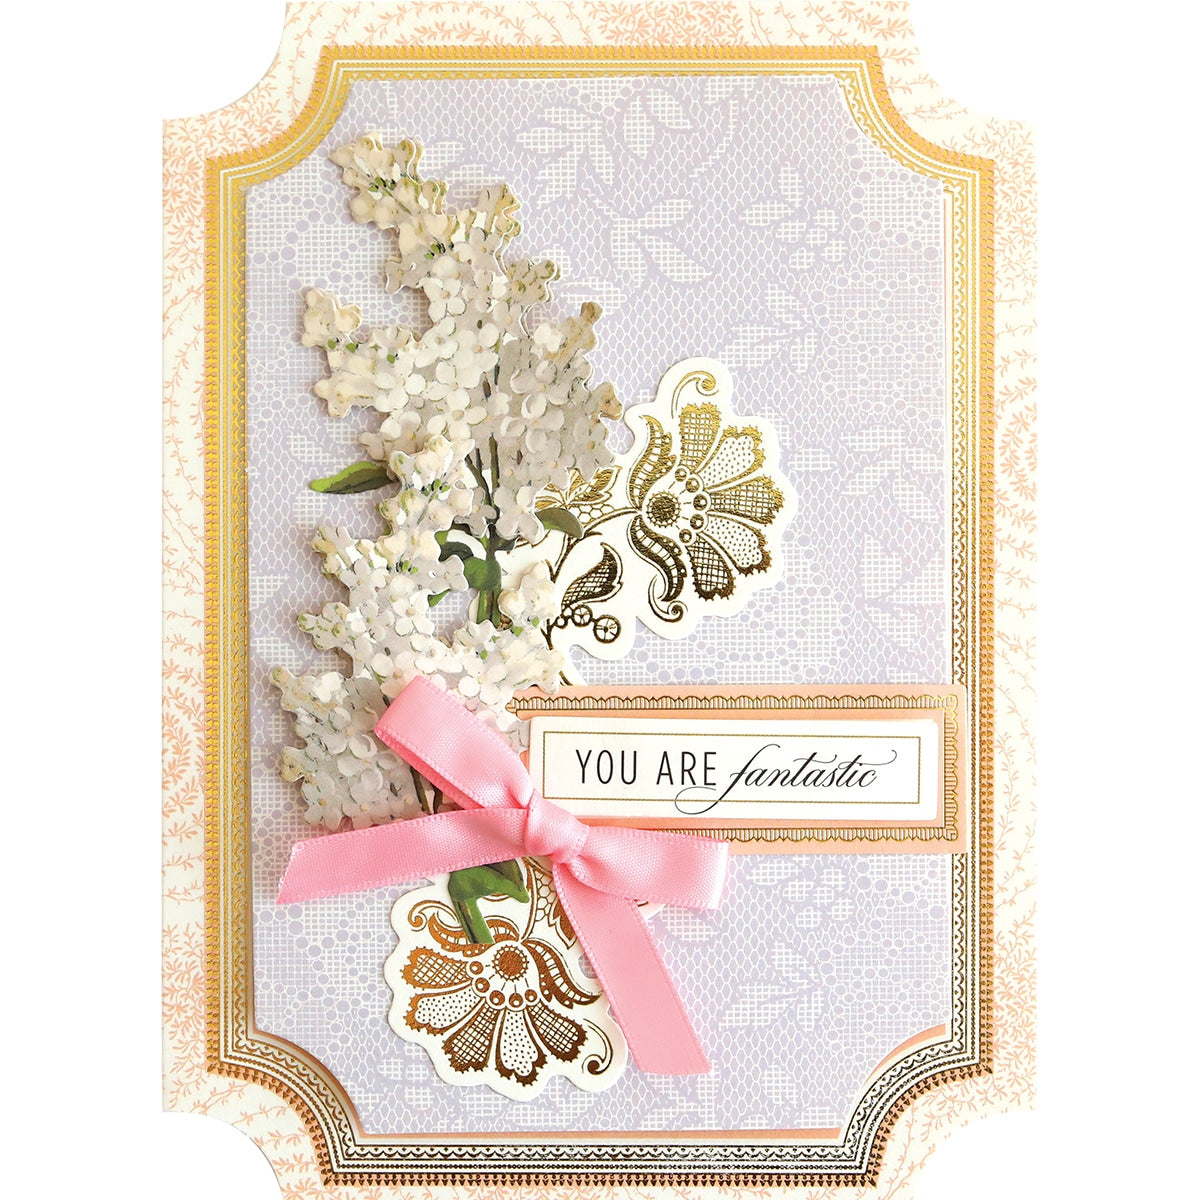 A Simply Friendship Card Making Kit with lilac flowers and a pink ribbon.